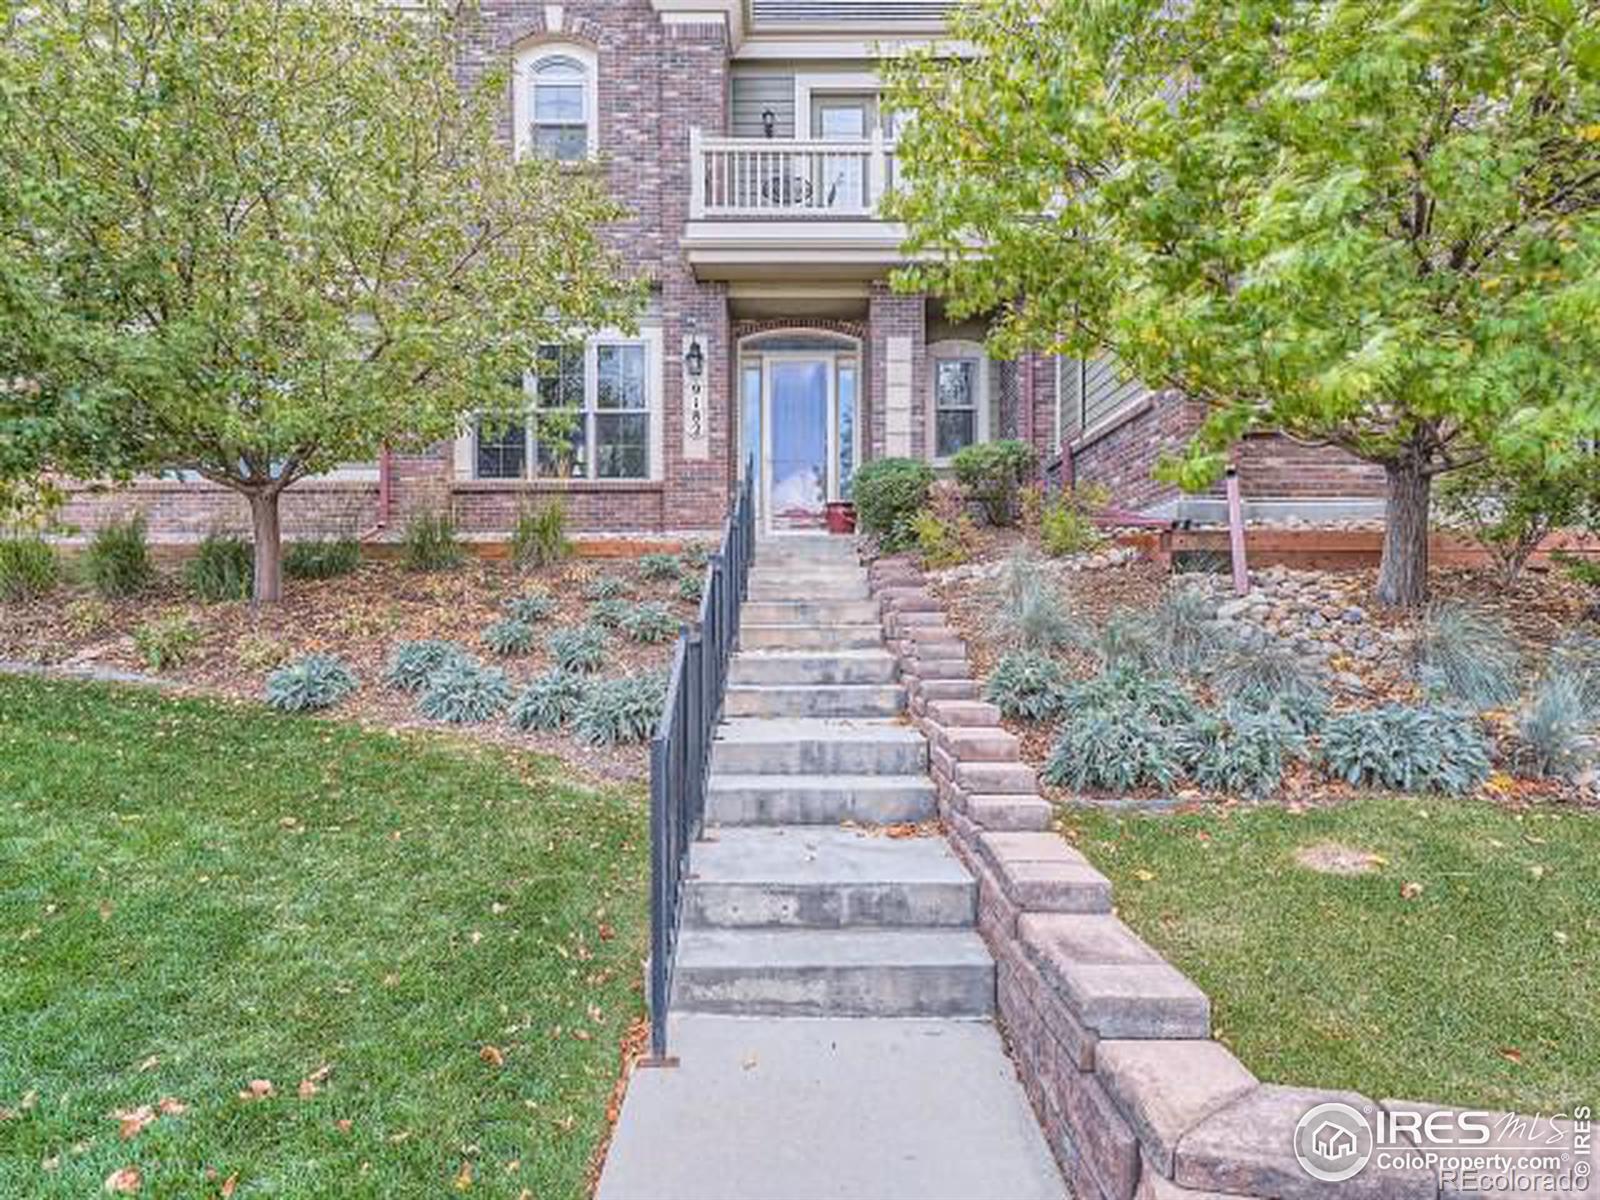 9182  ridgegate parkway, Lone Tree sold home. Closed on 2024-01-19 for $725,000.